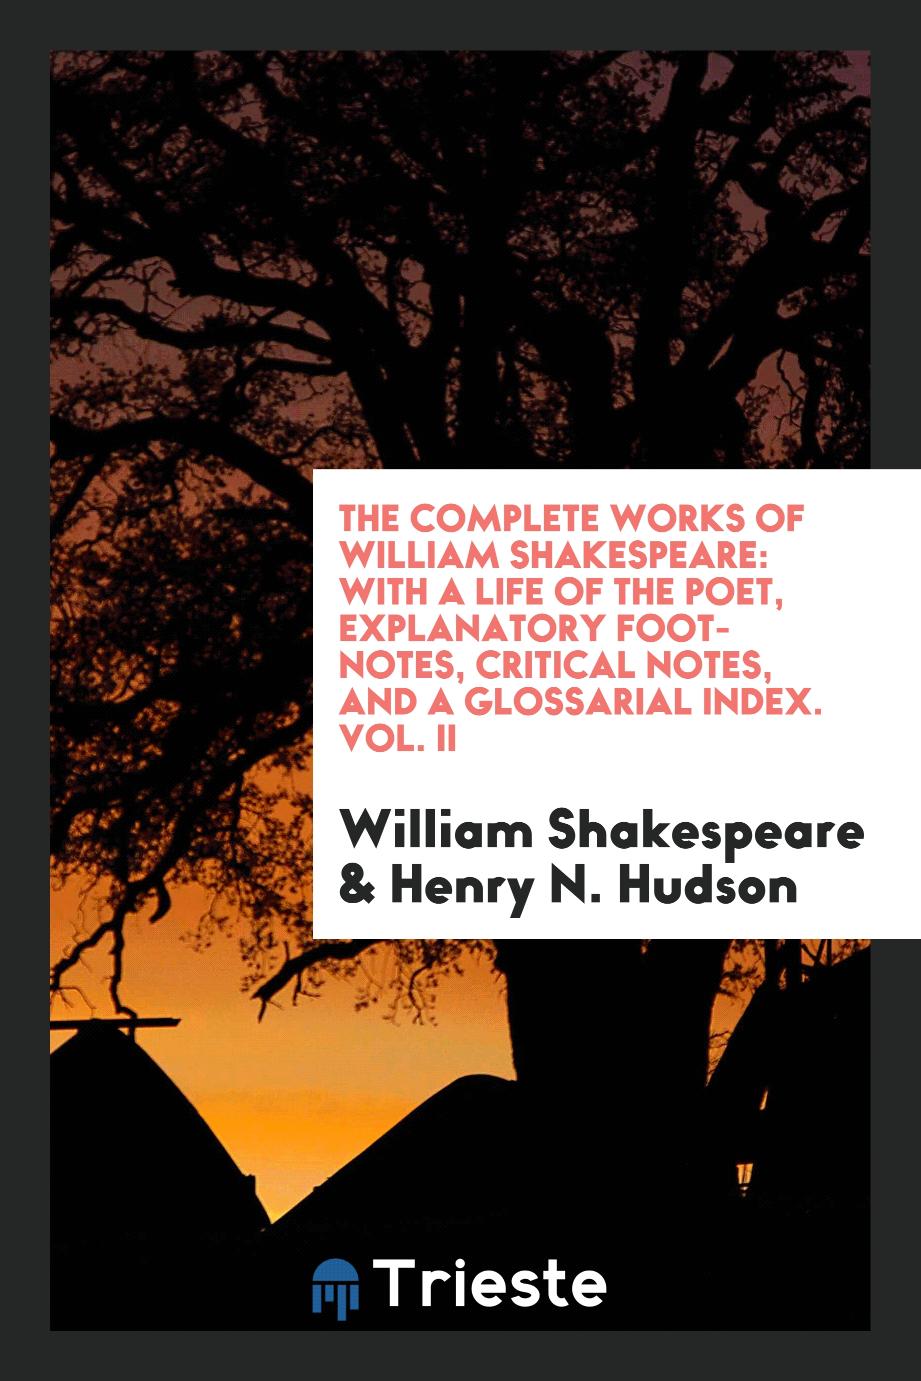 The complete works of William Shakespeare: with a life of the poet, explanatory foot-notes, critical notes, and a glossarial index. Vol. II